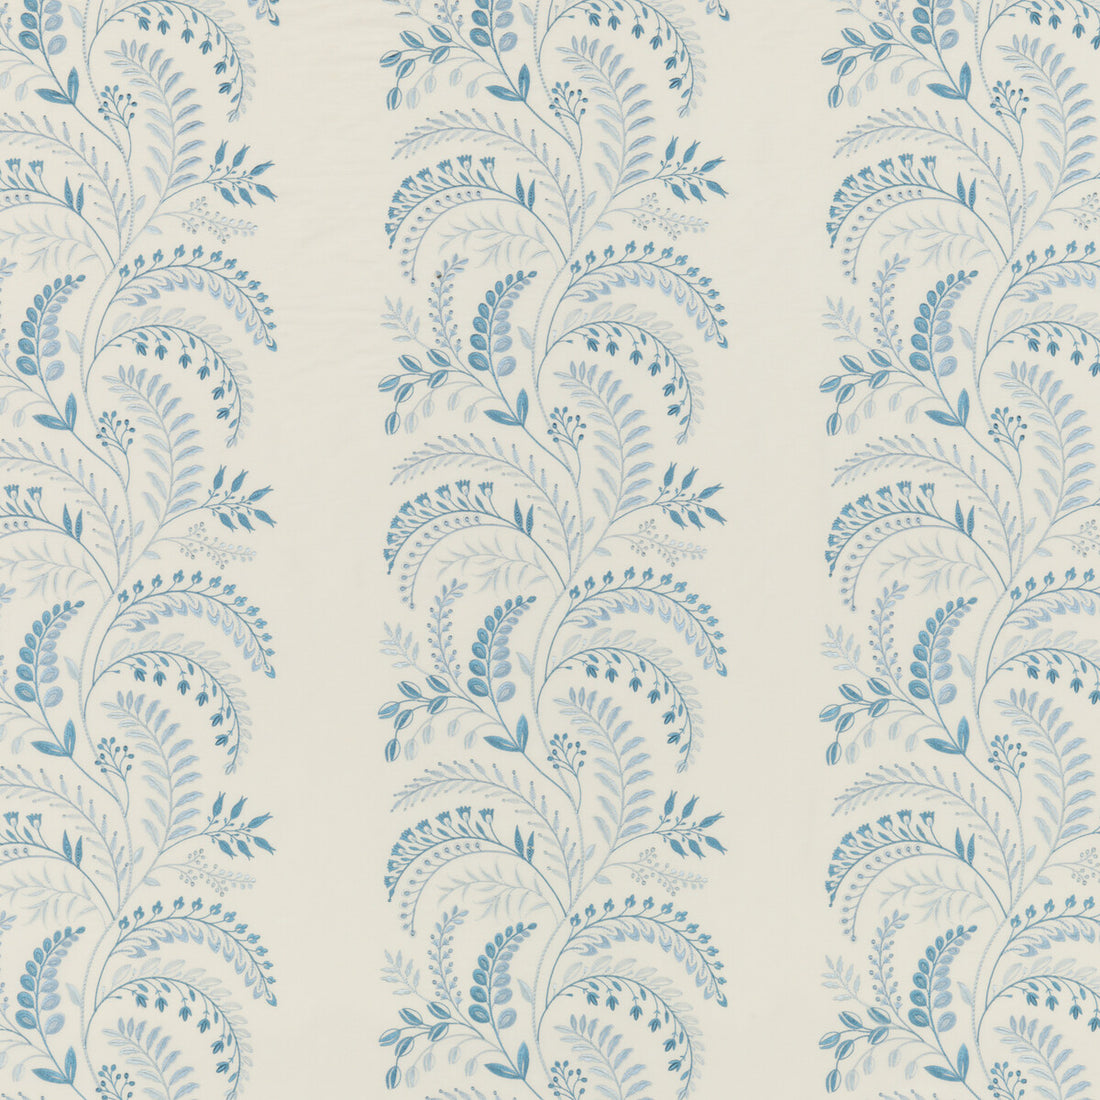 Pennington fabric in soft blue color - pattern BF10779.3.0 - by G P &amp; J Baker in the Signature Prints collection